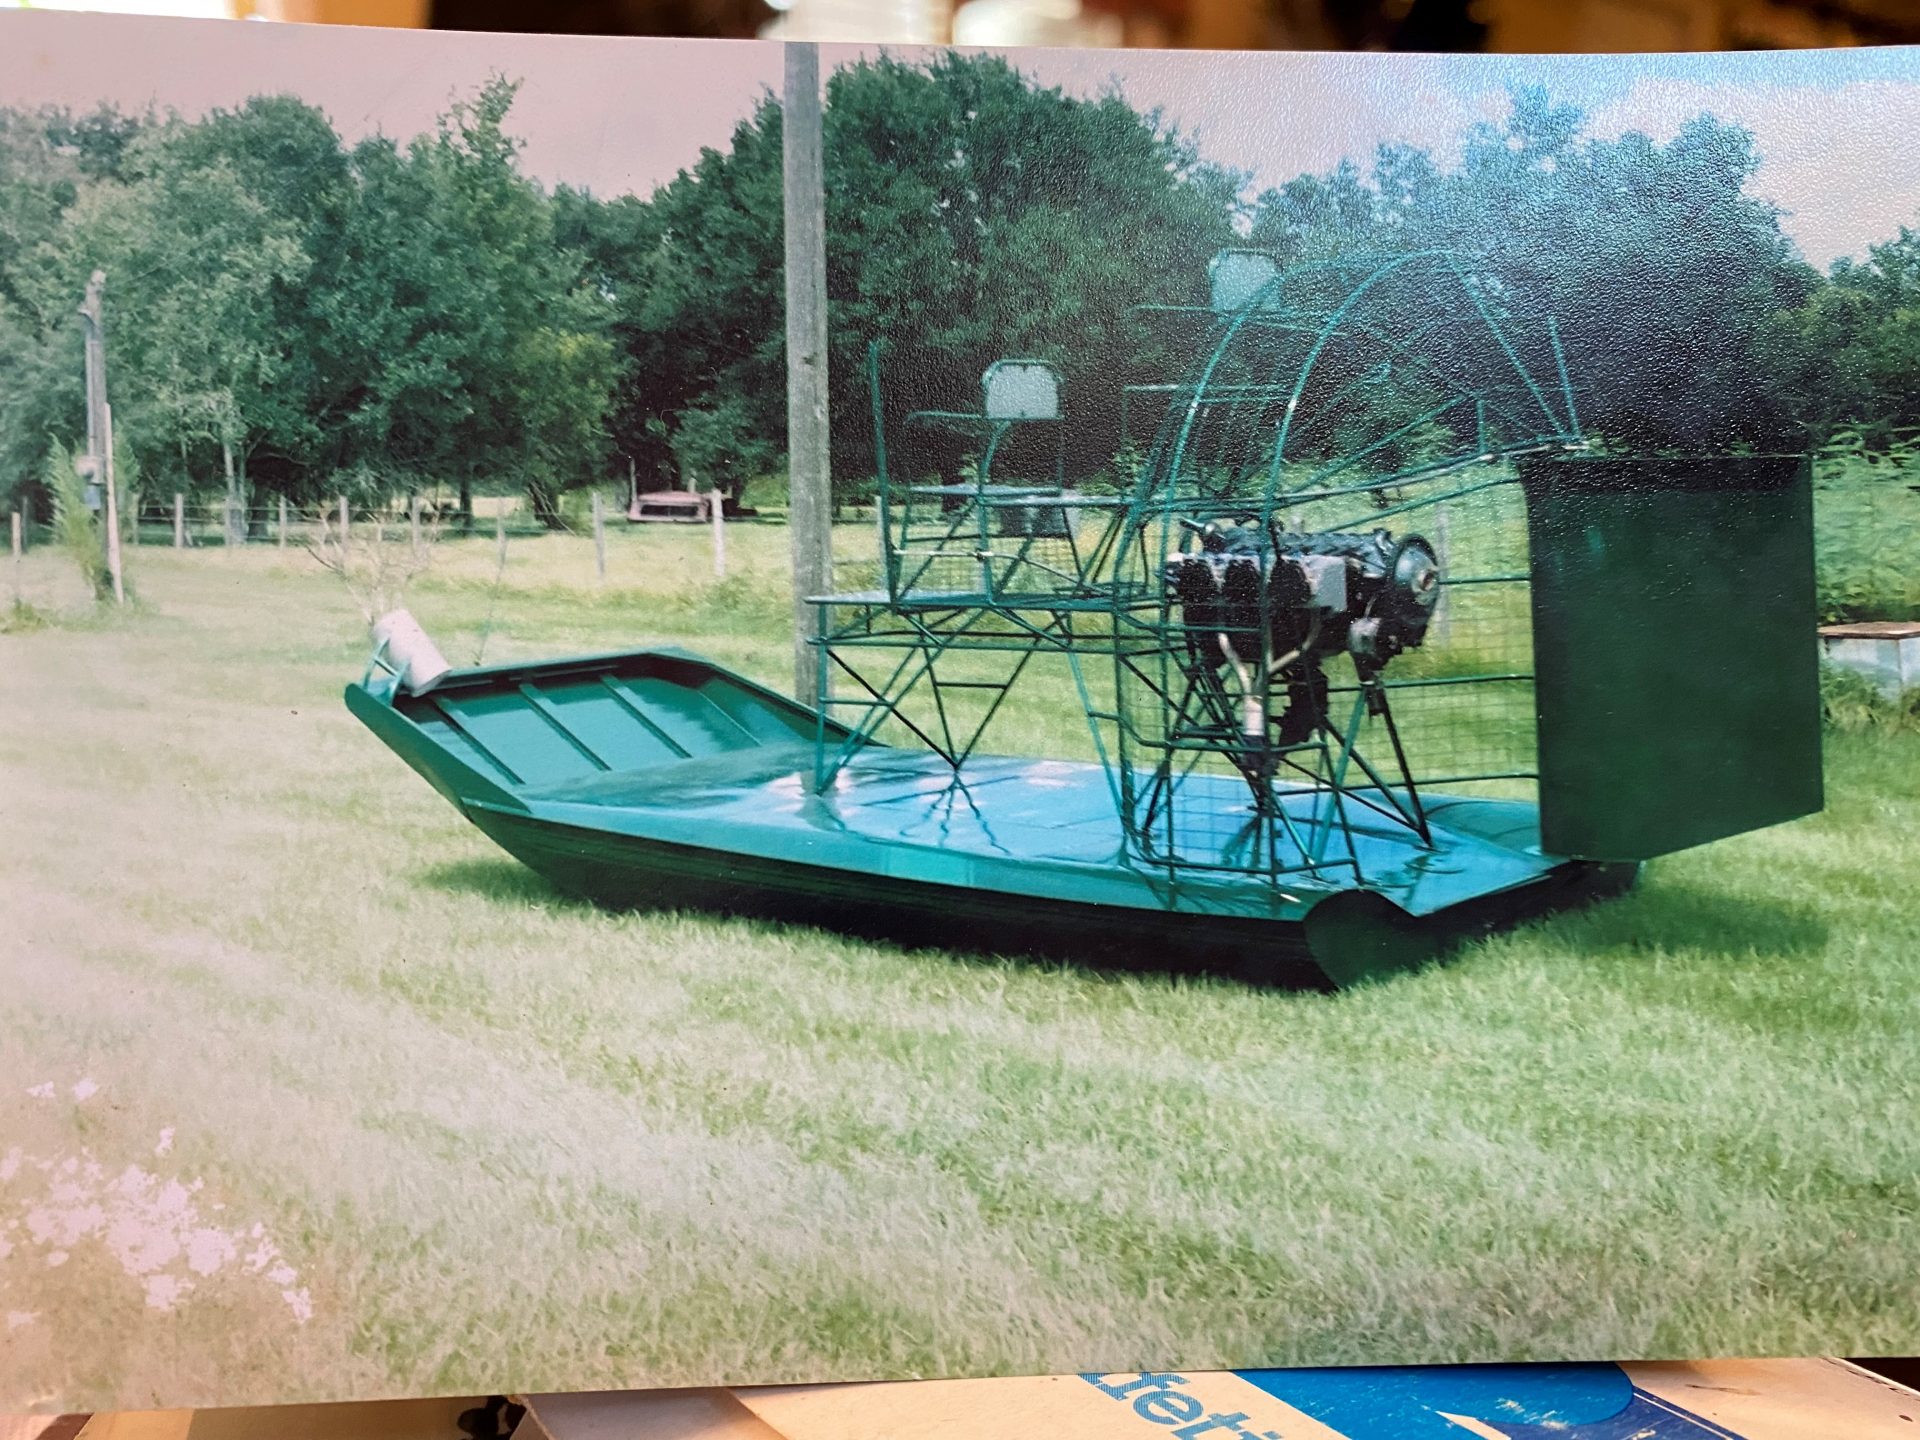 green airboat at the Okeechobee shop?